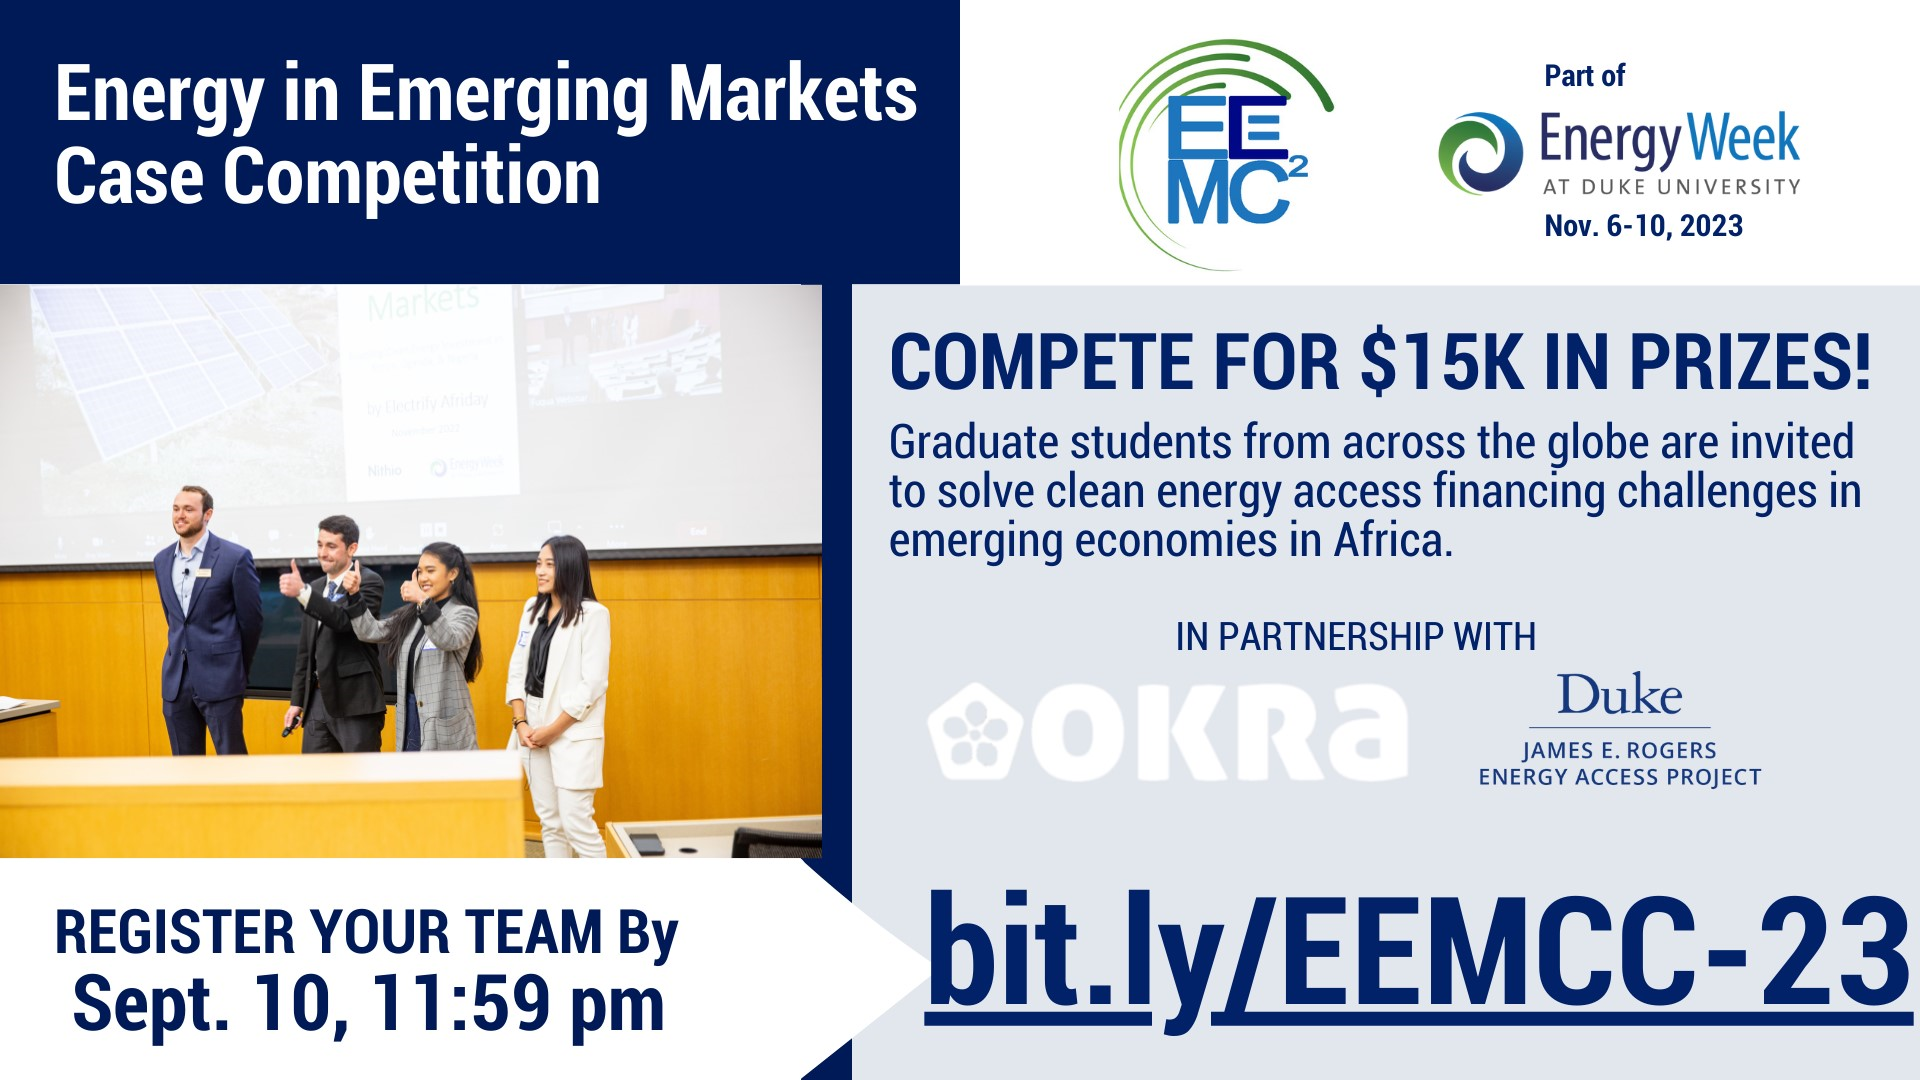 Energy in Emerging Markets Case Competition; Register your team by Sep 10, 11:59pm bit.ly/EEMCC-23